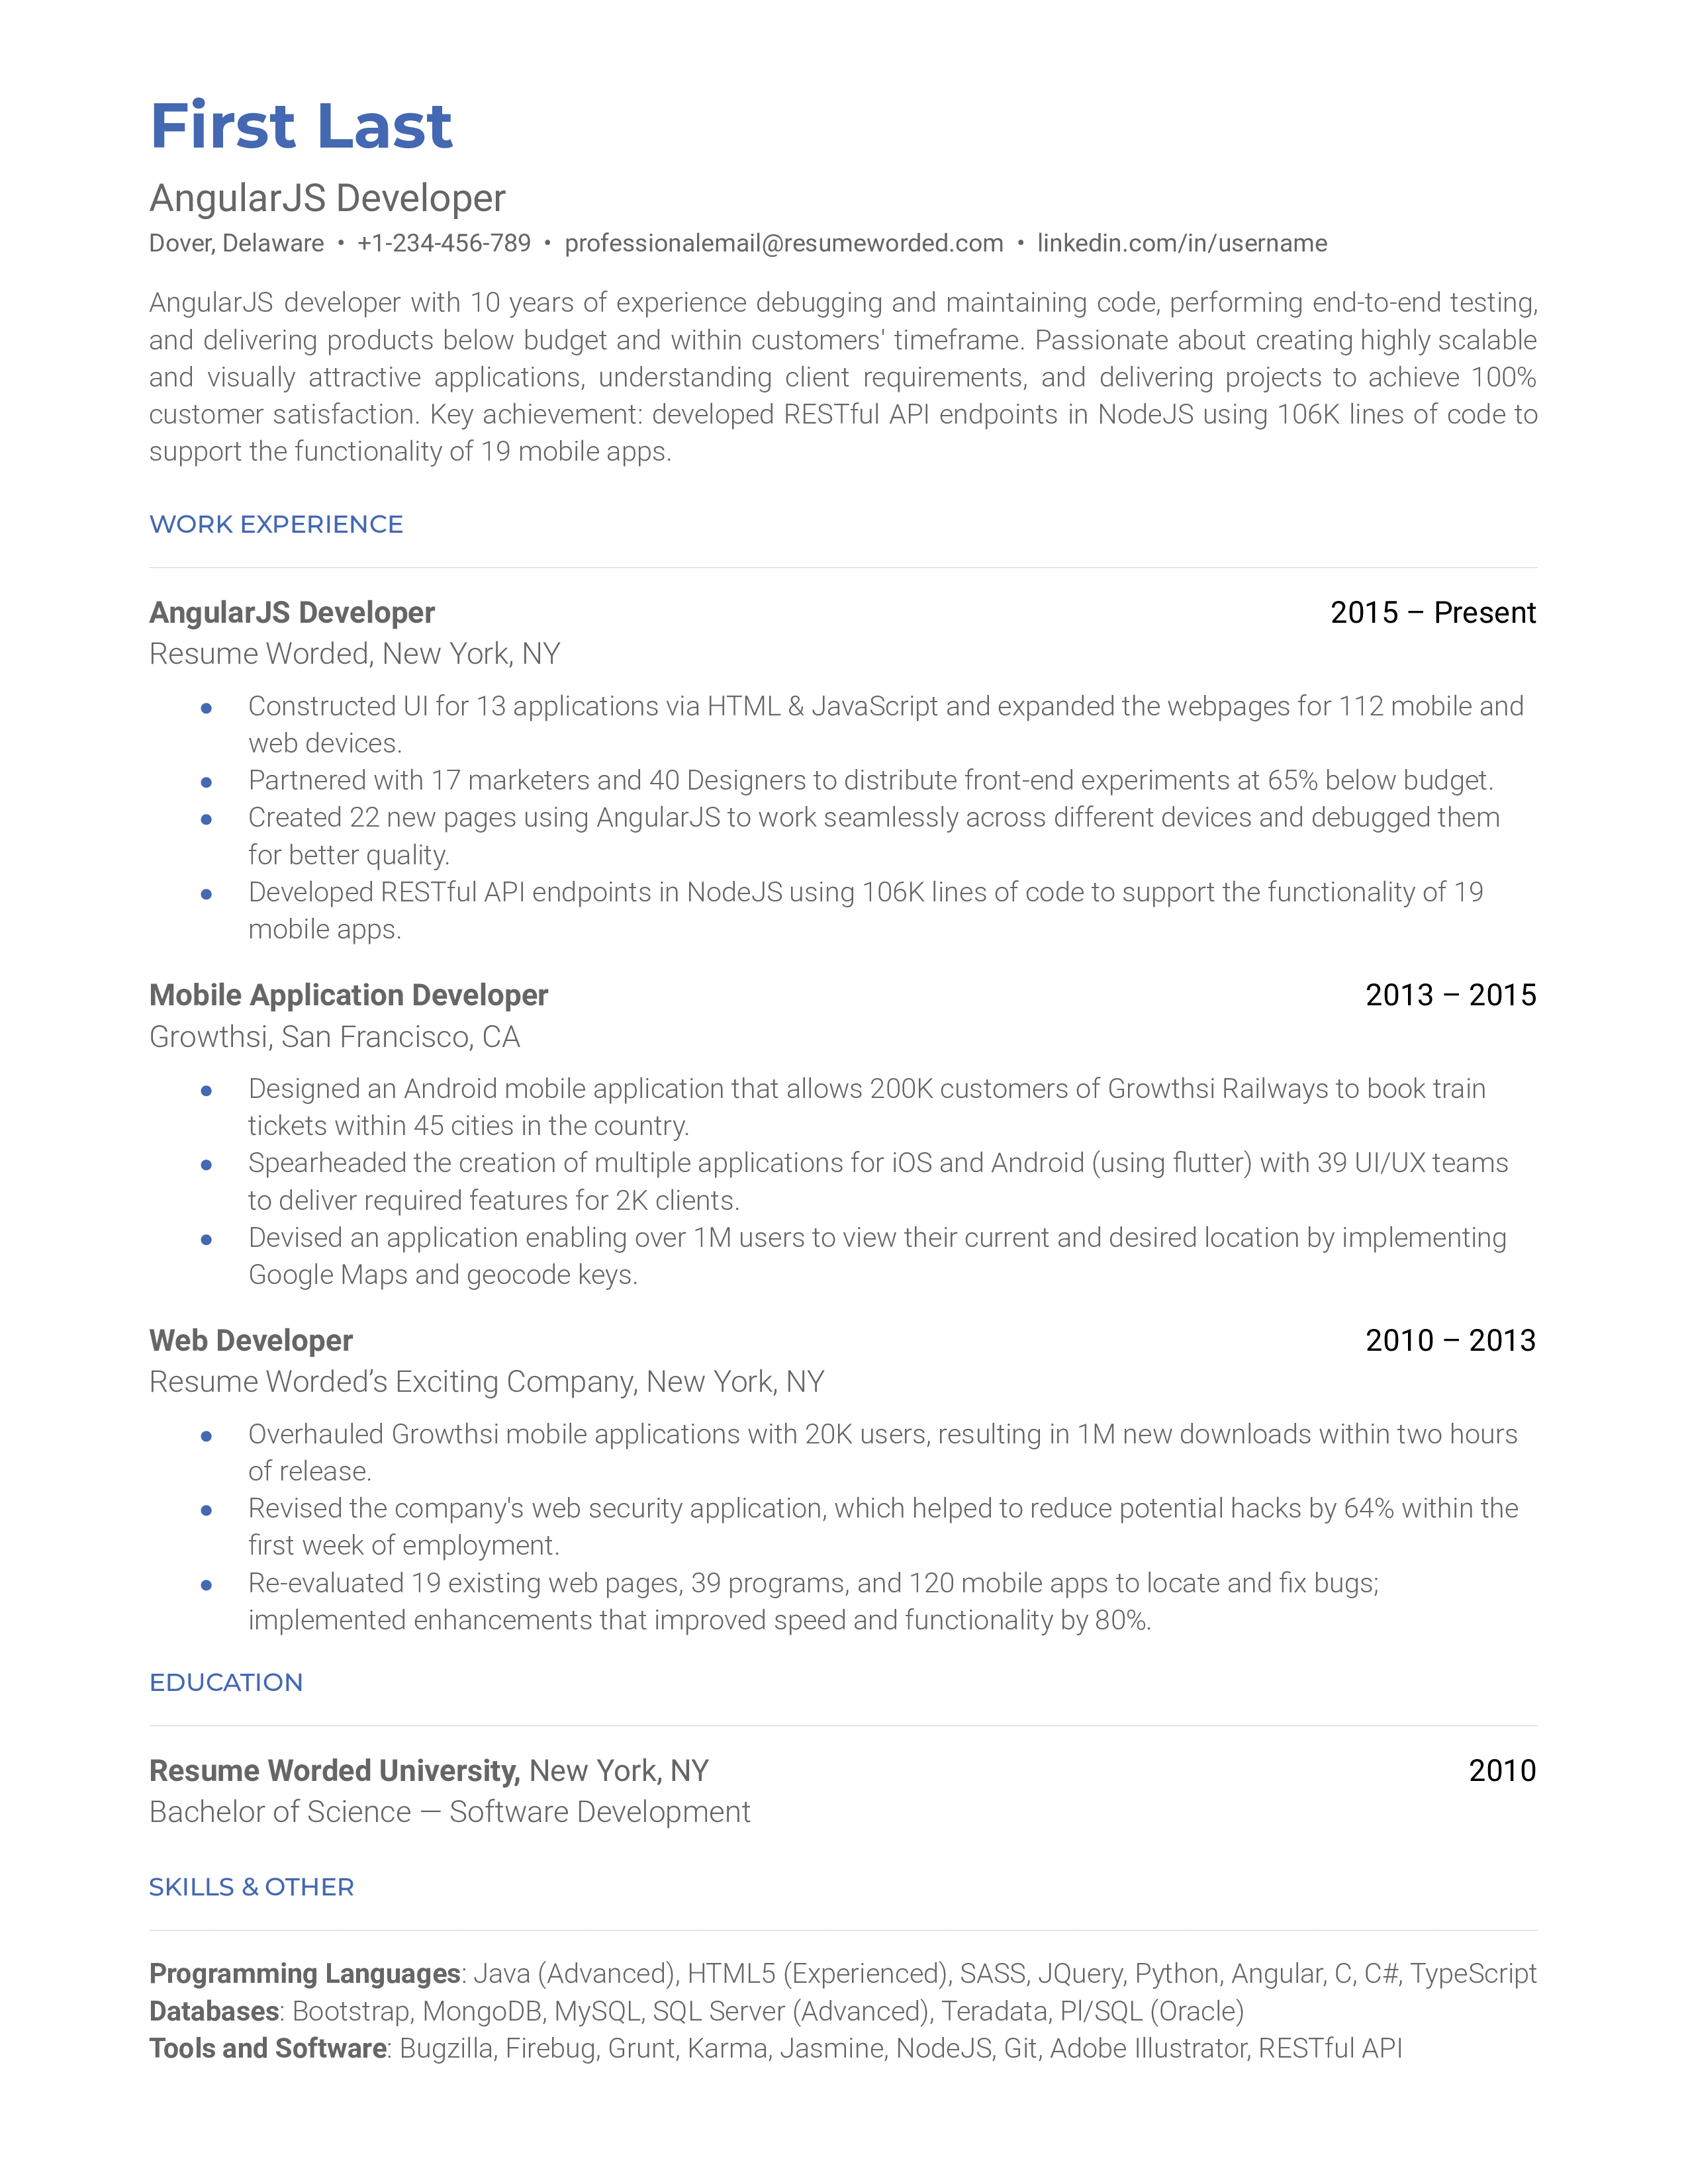 A well-formatted CV of an AngularJS Developer showcasing relevant projects and technical expertise.